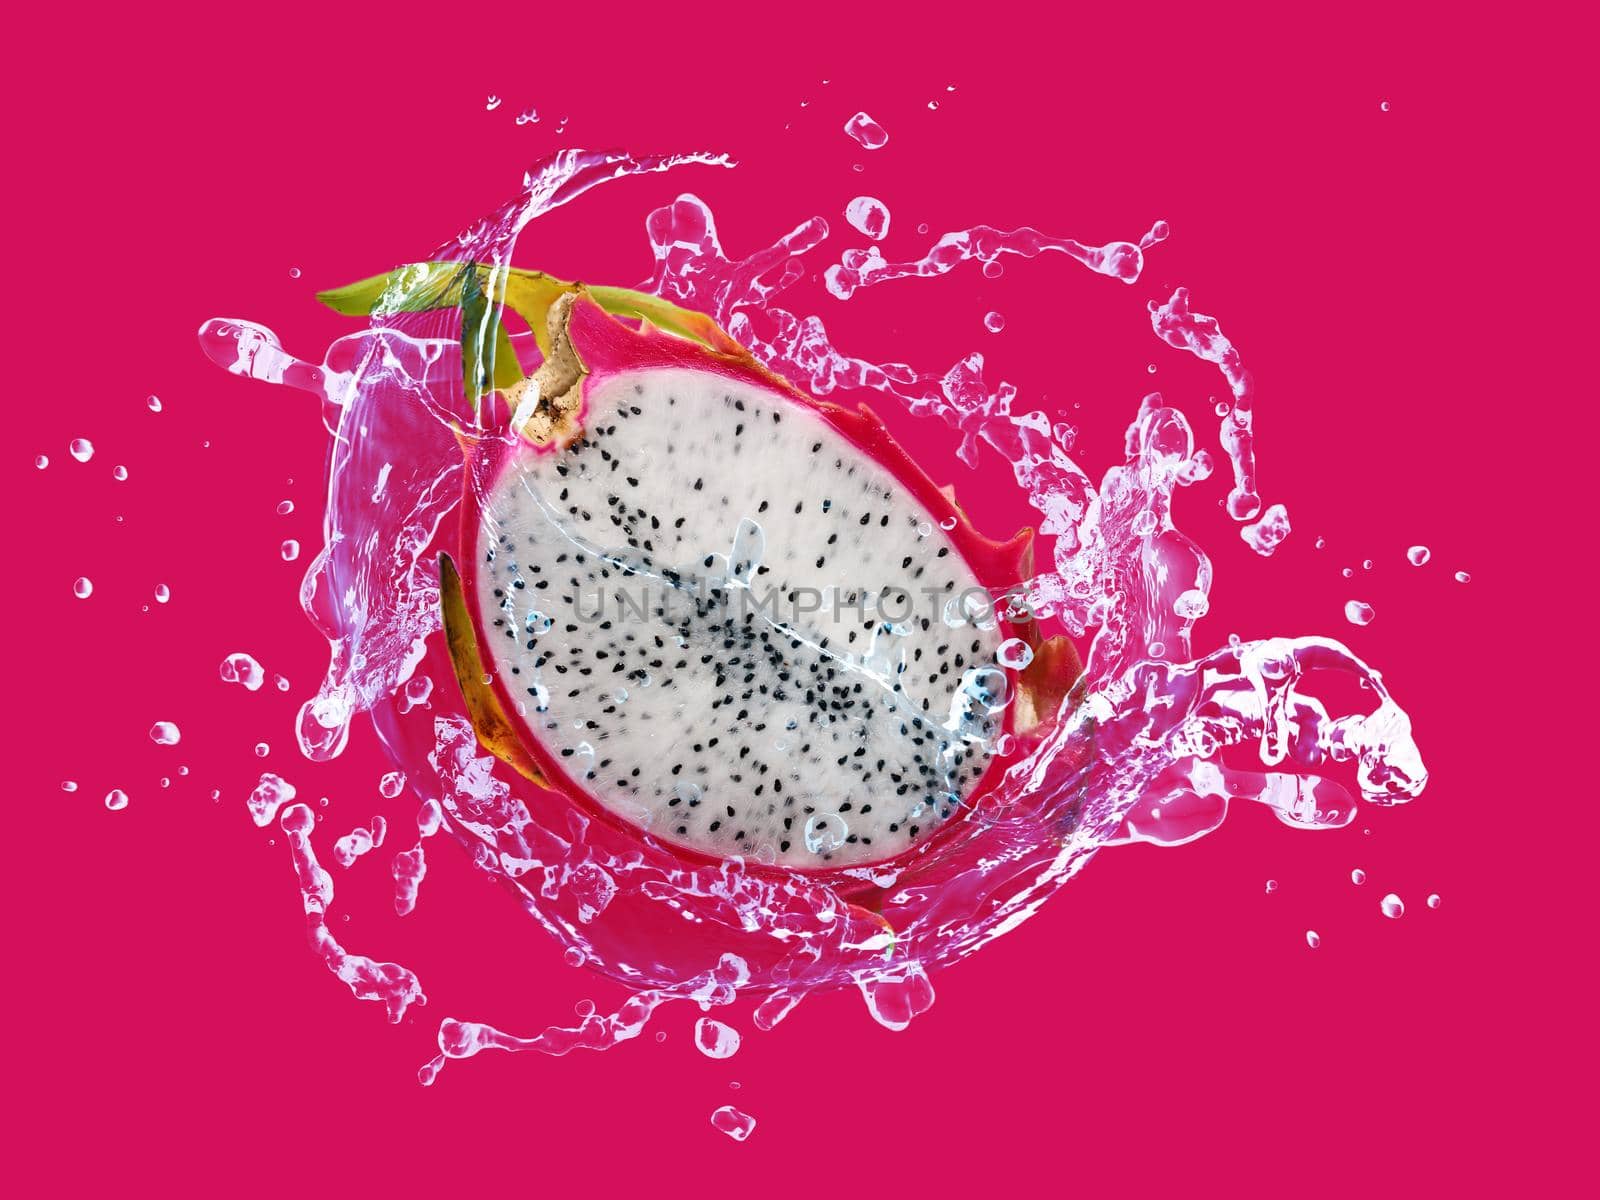 Hafl Dragon fruit with water splash by Wasant